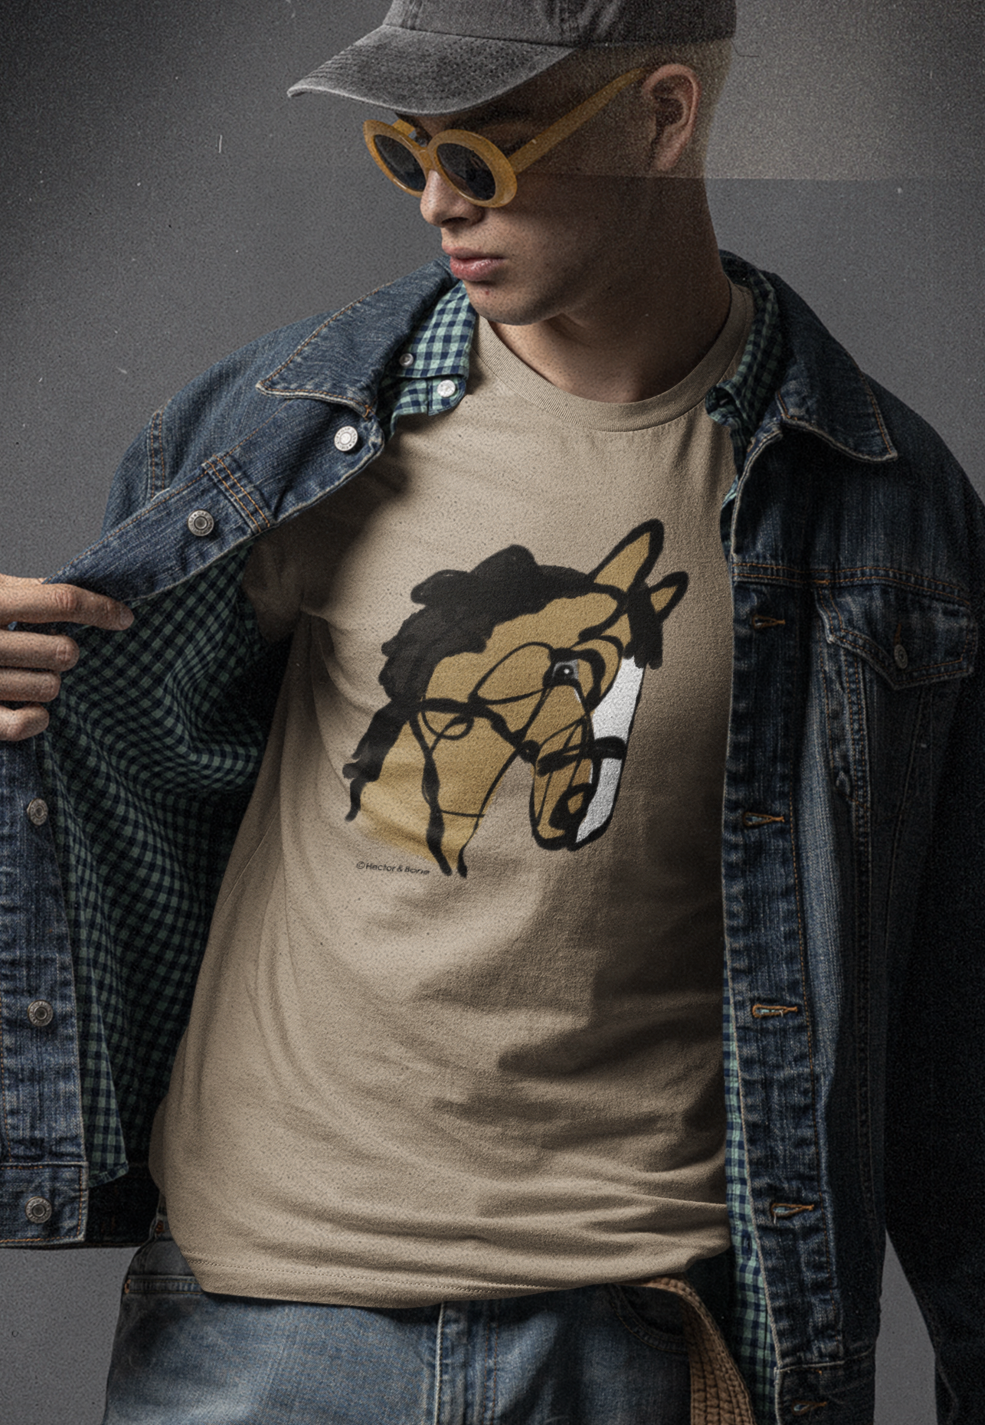 Horse T-shirt - Trendy young man wearing an 'I love my horse' pony t-shirt design on camel colour vegan cotton by Hector and Bone